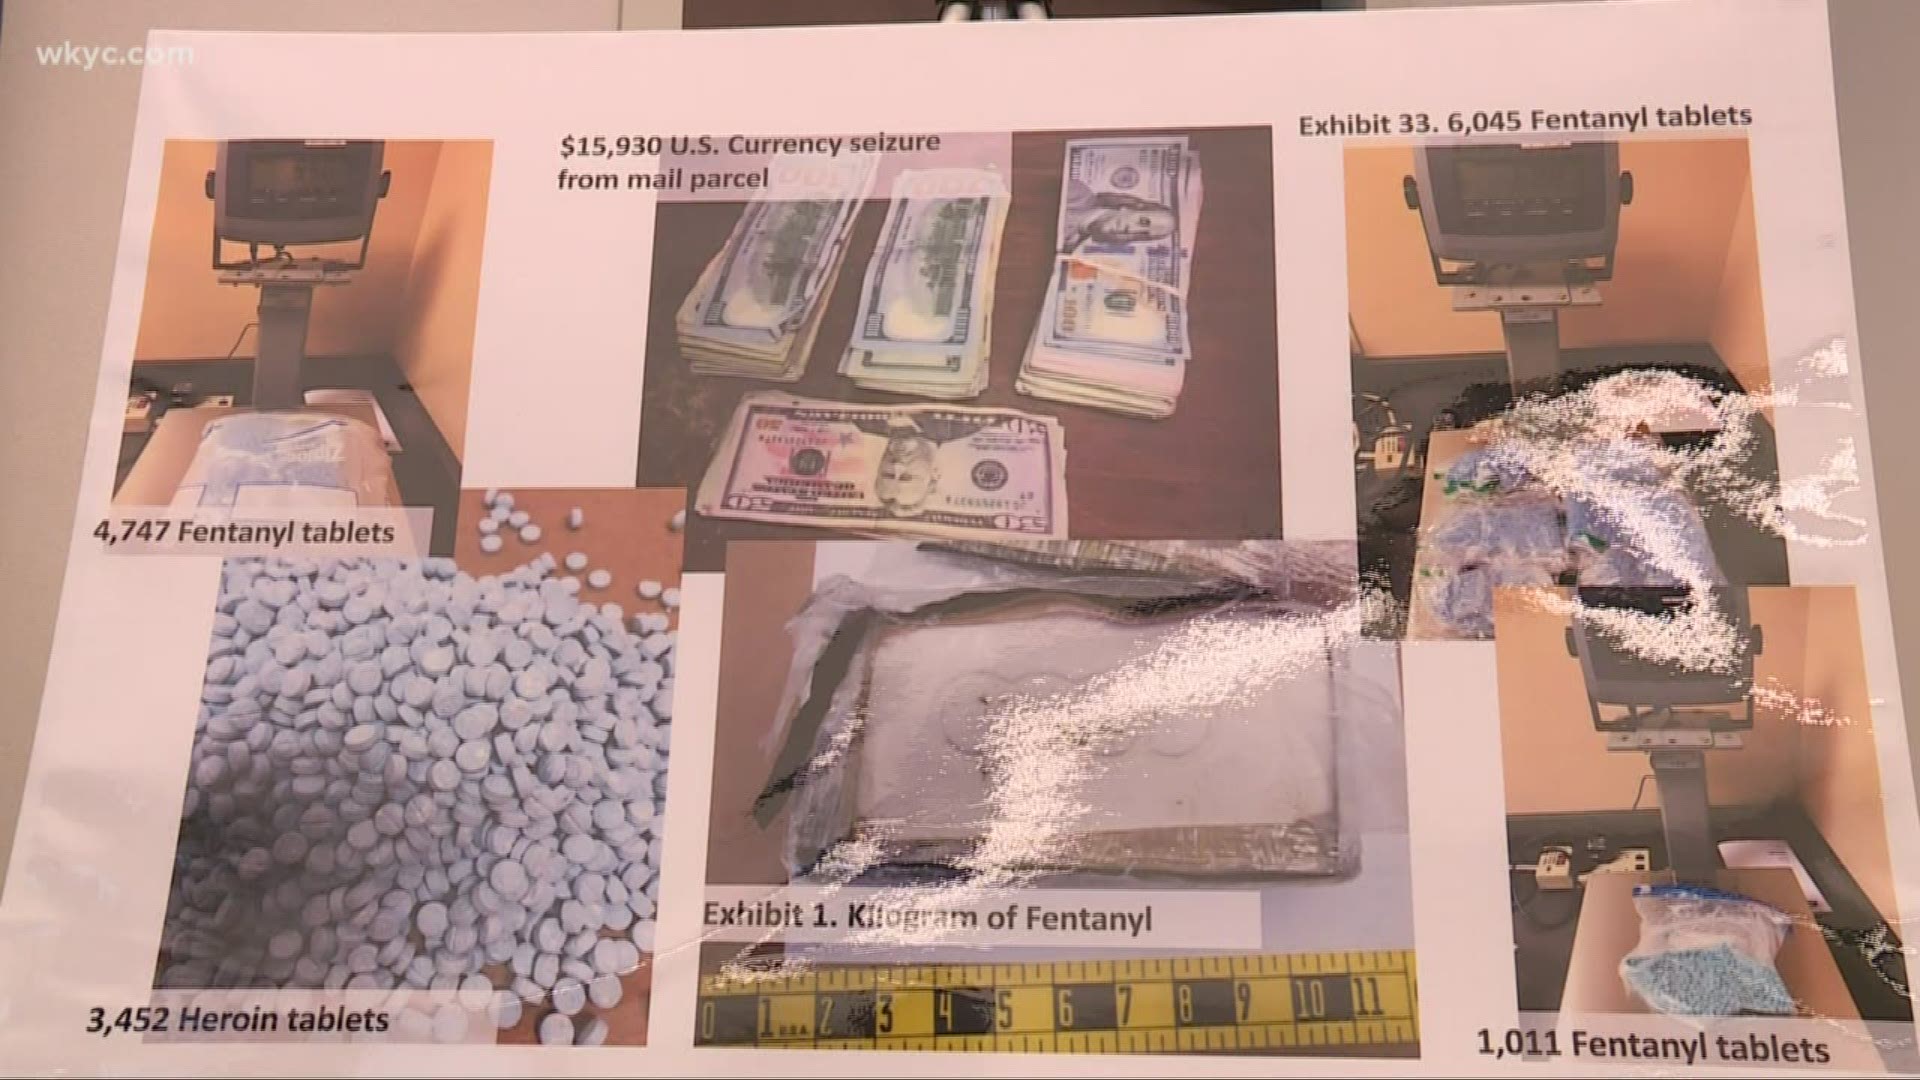 The U.S. Attorney's Office for the Northern District of Ohio held a press conference Thursday to give details on a drug bust with ties to the Cleveland area.  Federal charges of conspiracy to distribute controlled substances were filed against 10 people, most from Northeast Ohio.